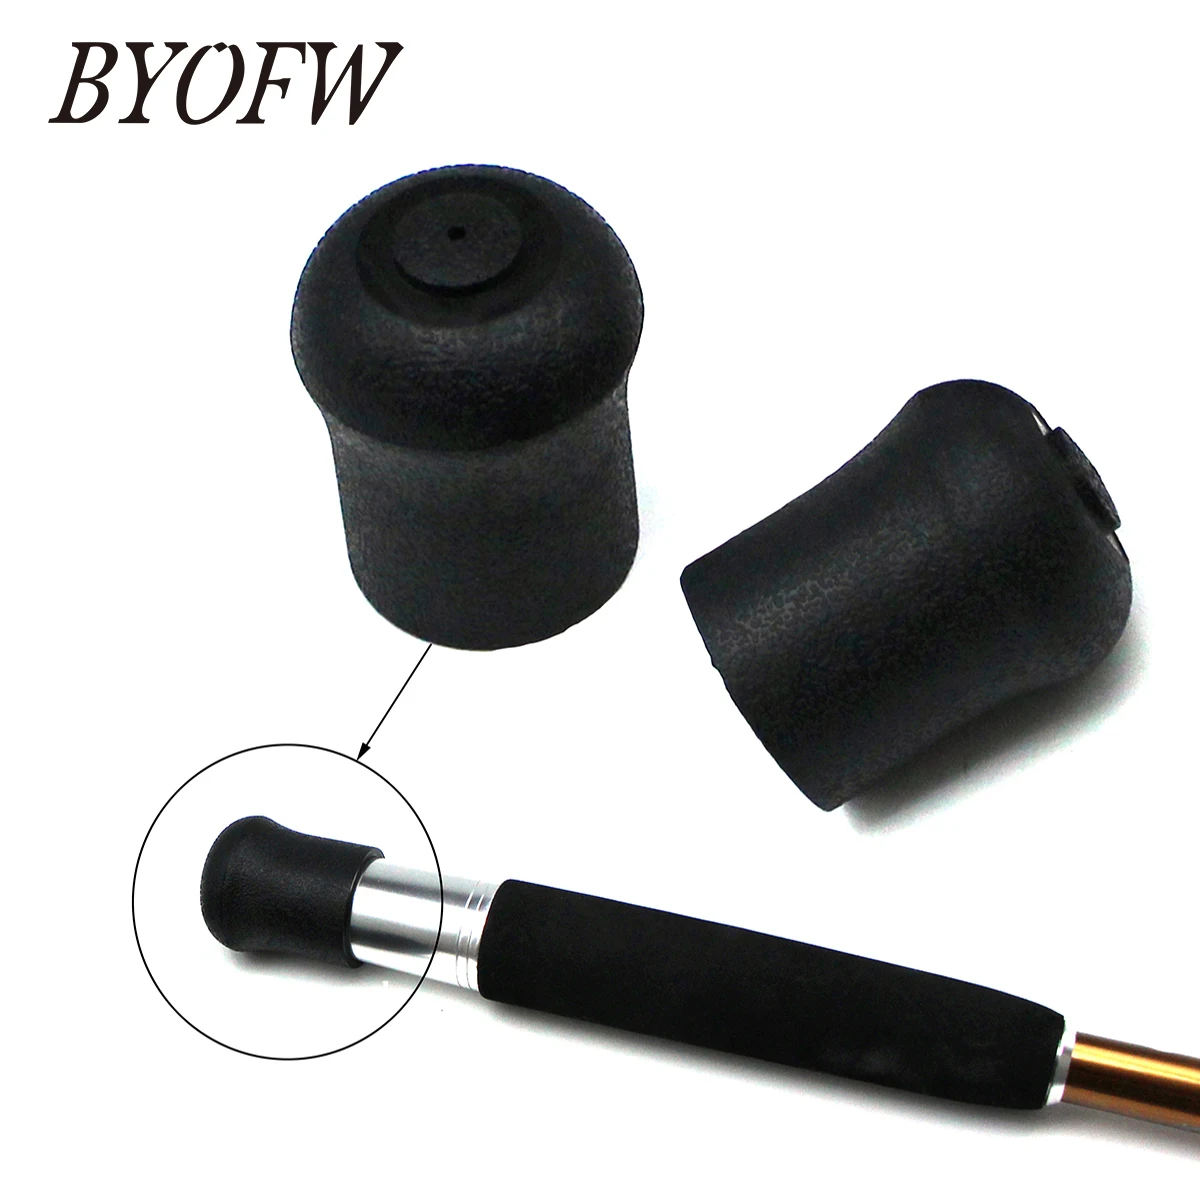 BYOFW 1 Piece Fishing Rod Handle Butt End Cap Black Durable Pole Protector  Building DIY Repair Or Replacement Cover Components